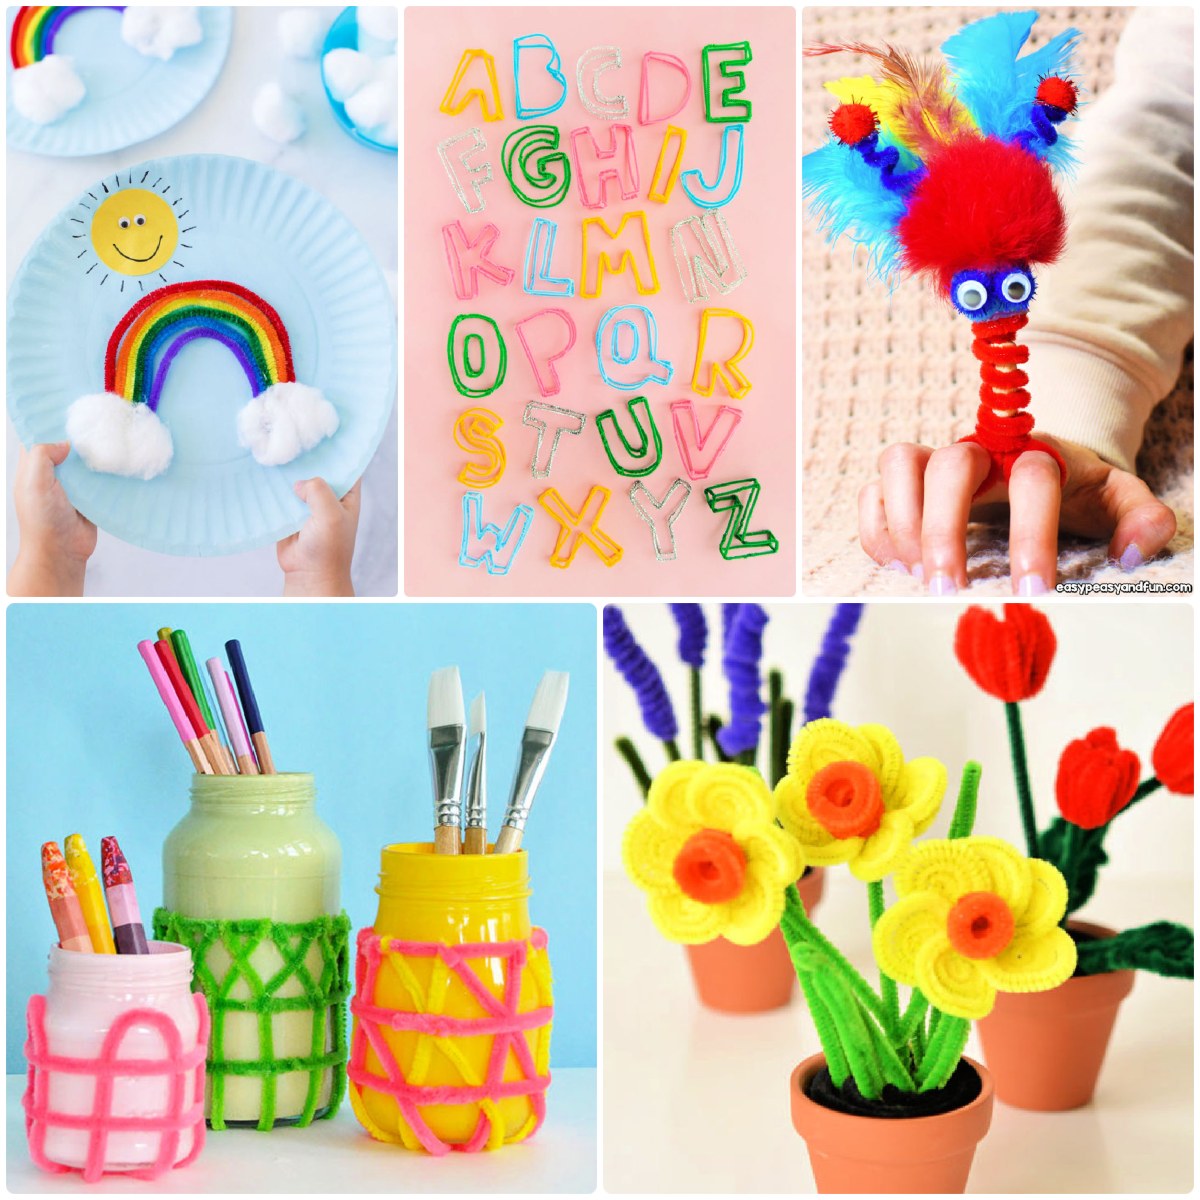 20 Best Pipe Cleaner Crafts for Kids